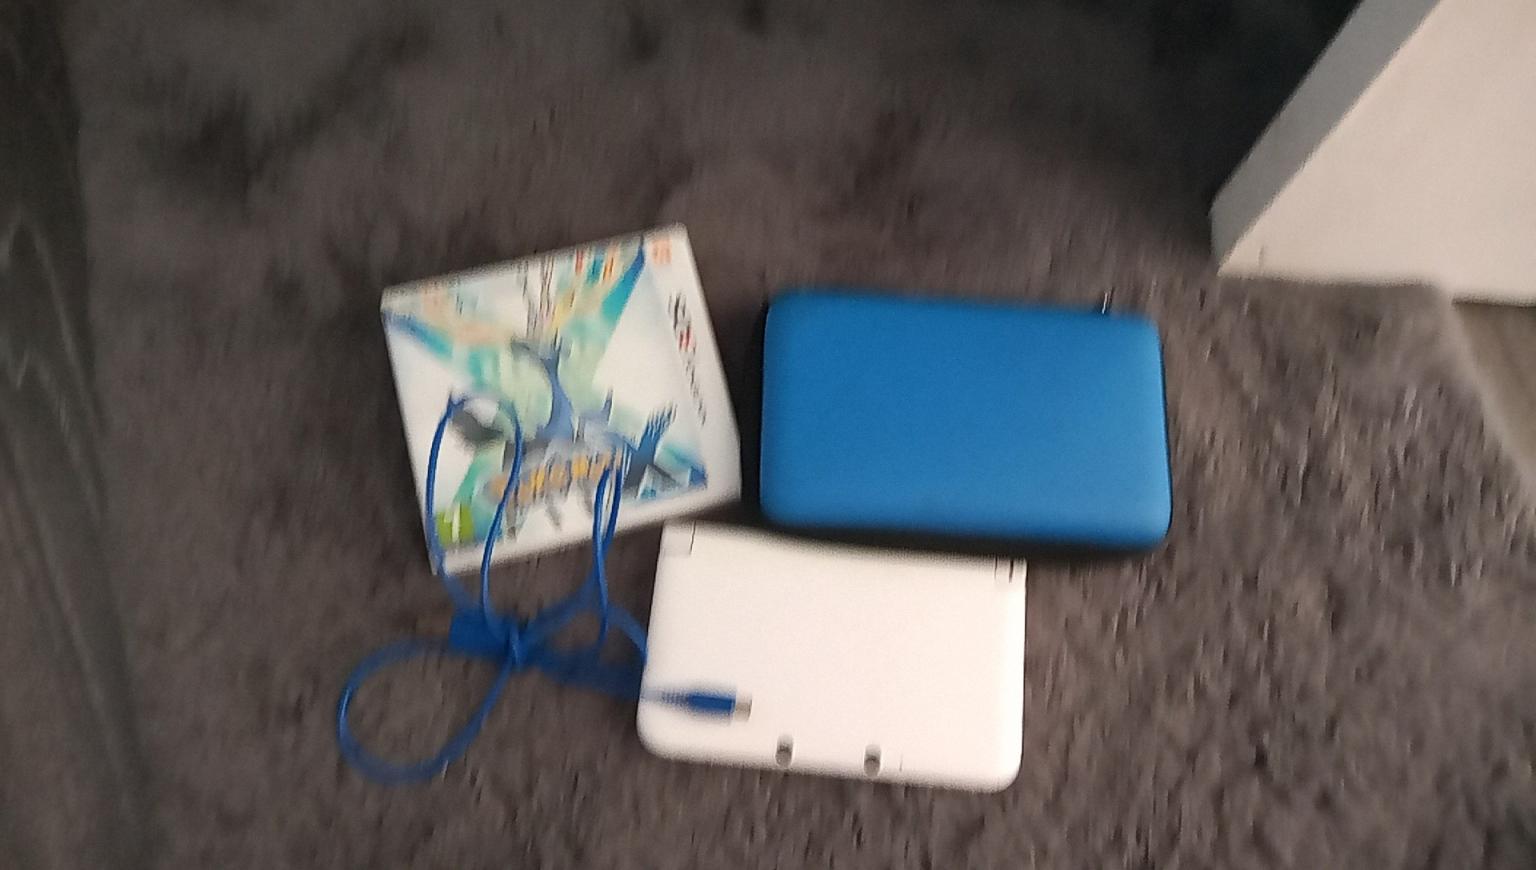 3ds to hdmi